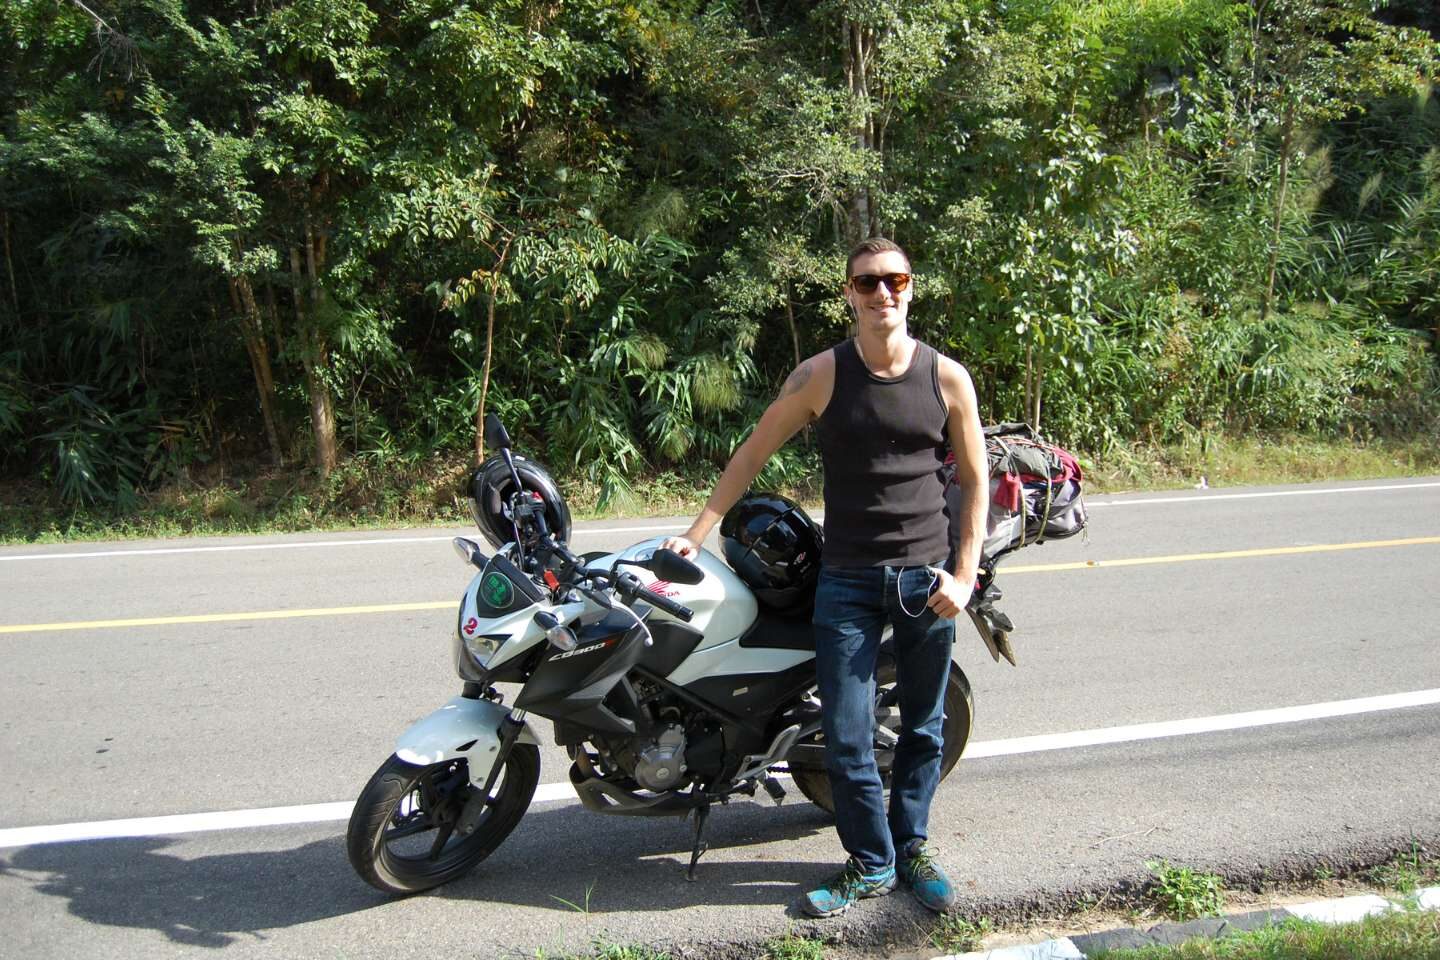 A man with motorbike on the road